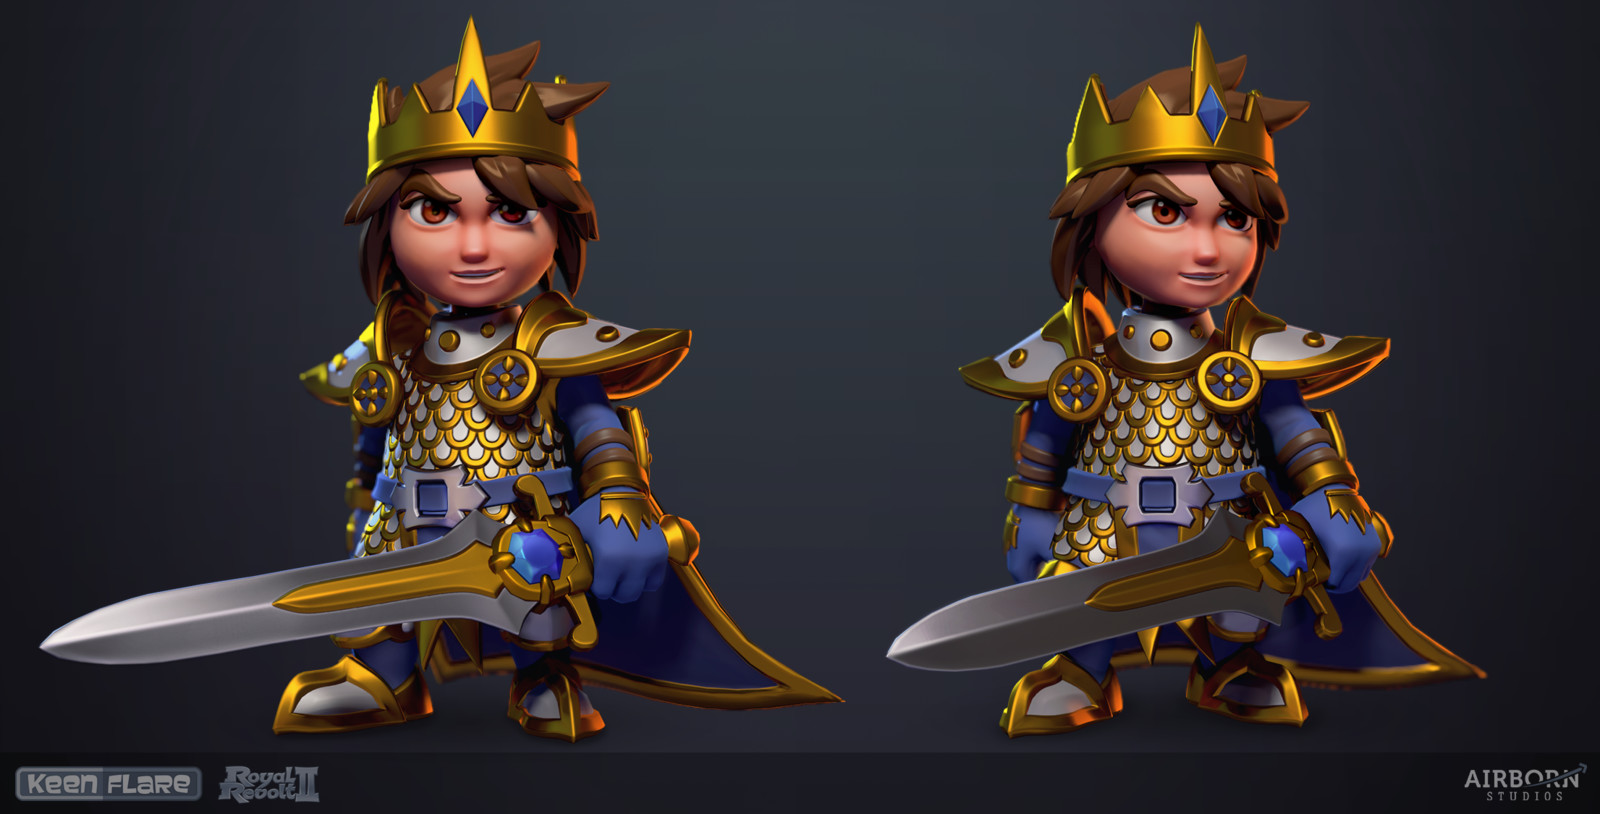 Royal Revolt 2: Hero final model by Tim Moreels 

We had done the original main protagonist of the game years ago and now got tasked with updating and improving the model.